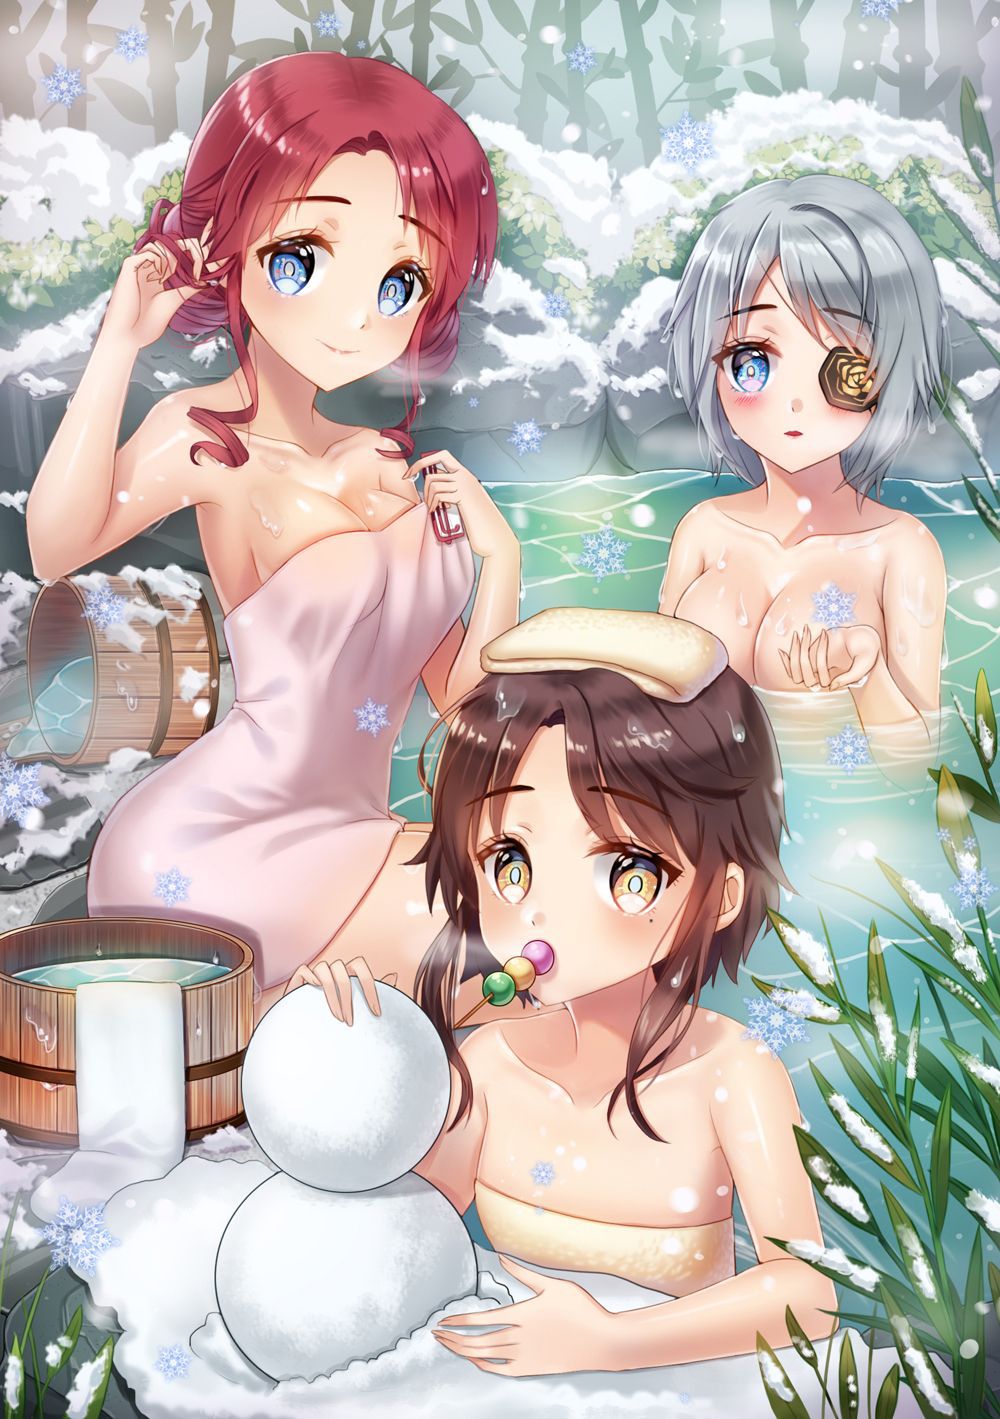 Summary the image you want to warm up (secondary-ZIP) pretty girls in bath 33